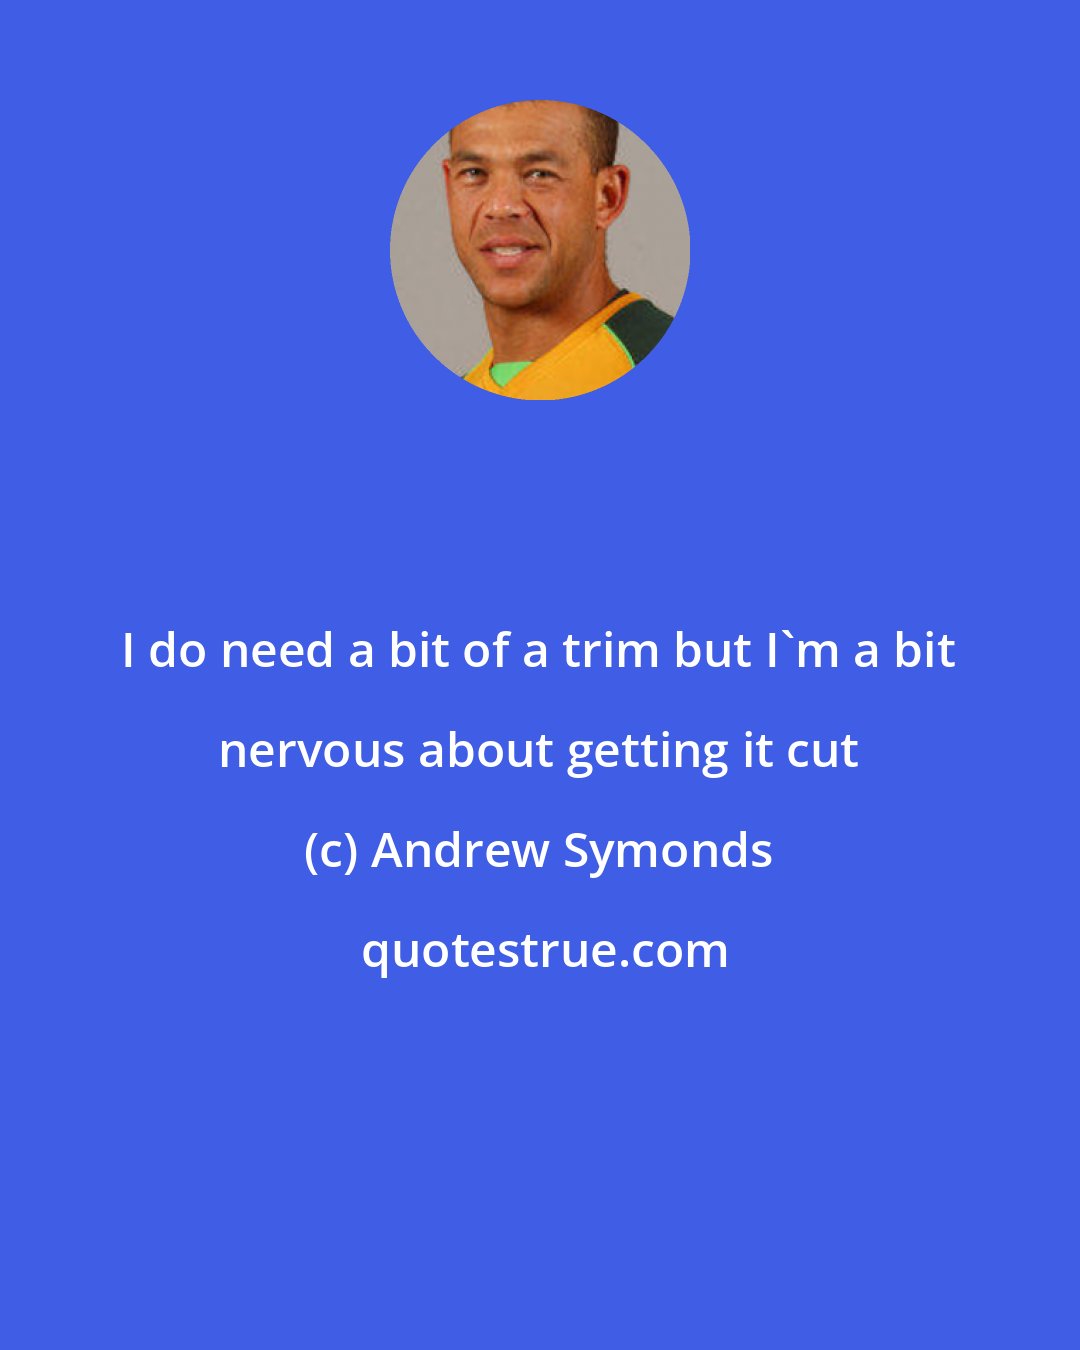 Andrew Symonds: I do need a bit of a trim but I'm a bit nervous about getting it cut